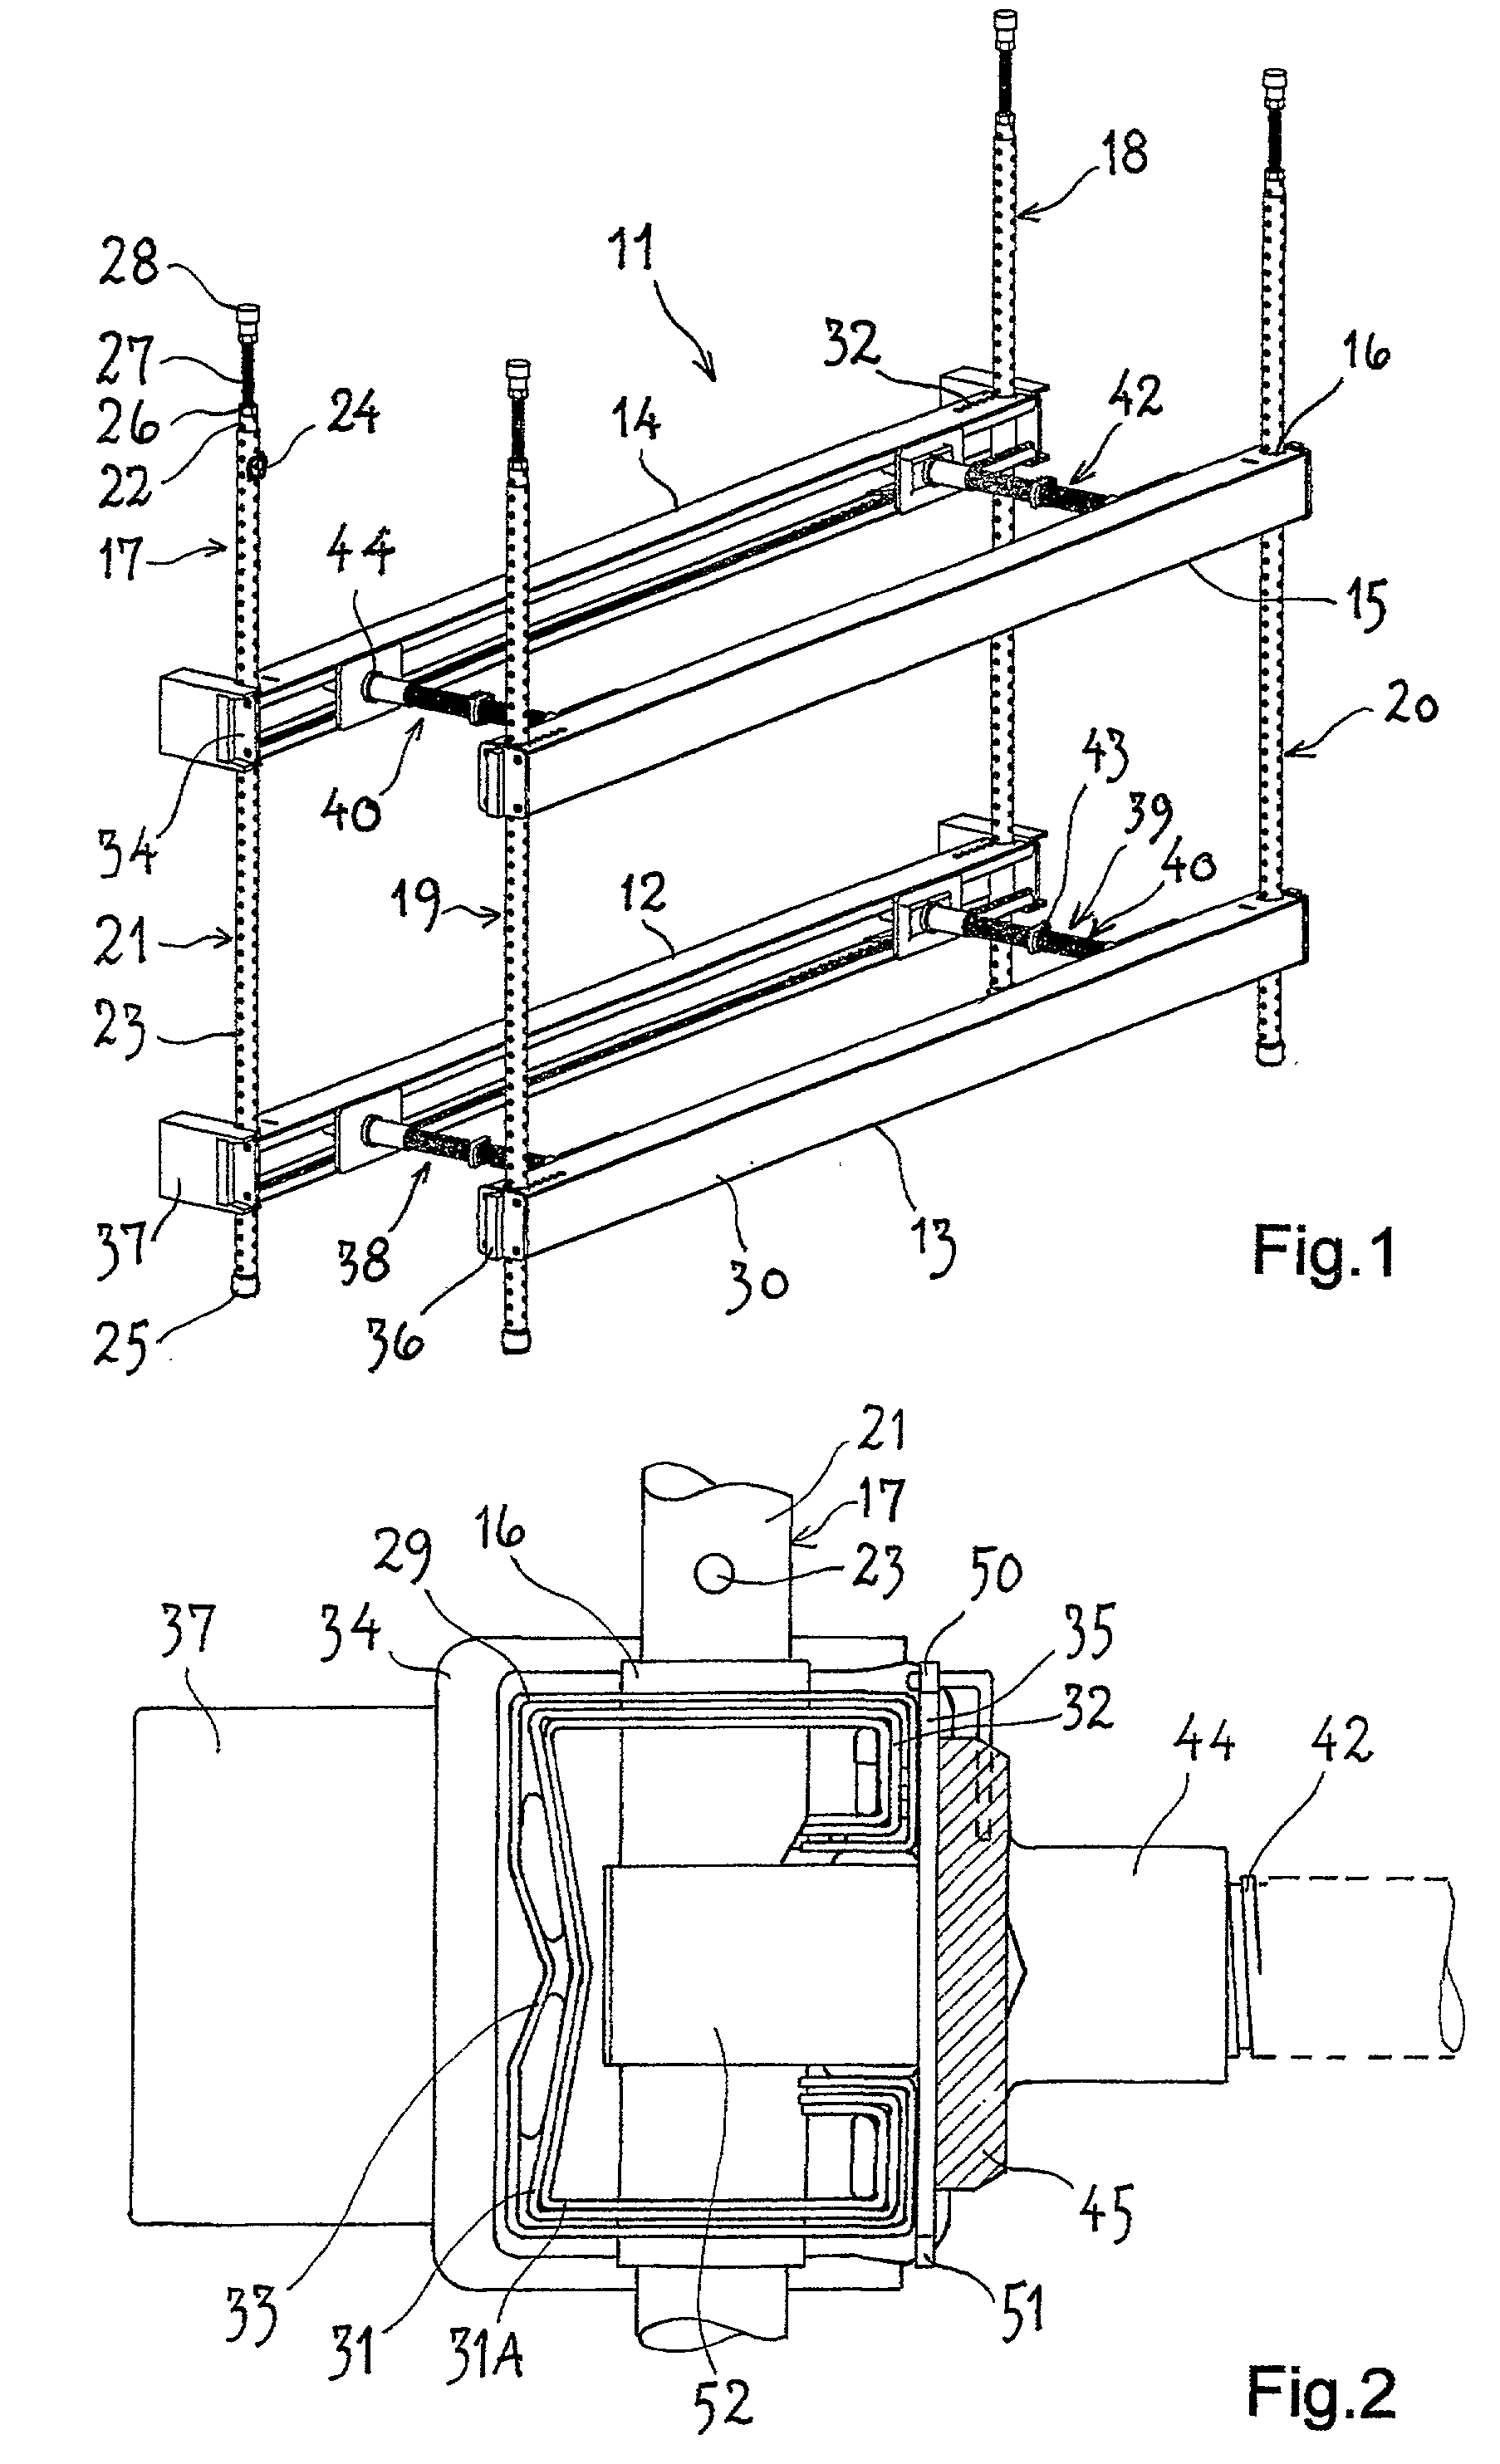 Building system for support device for goods carriers